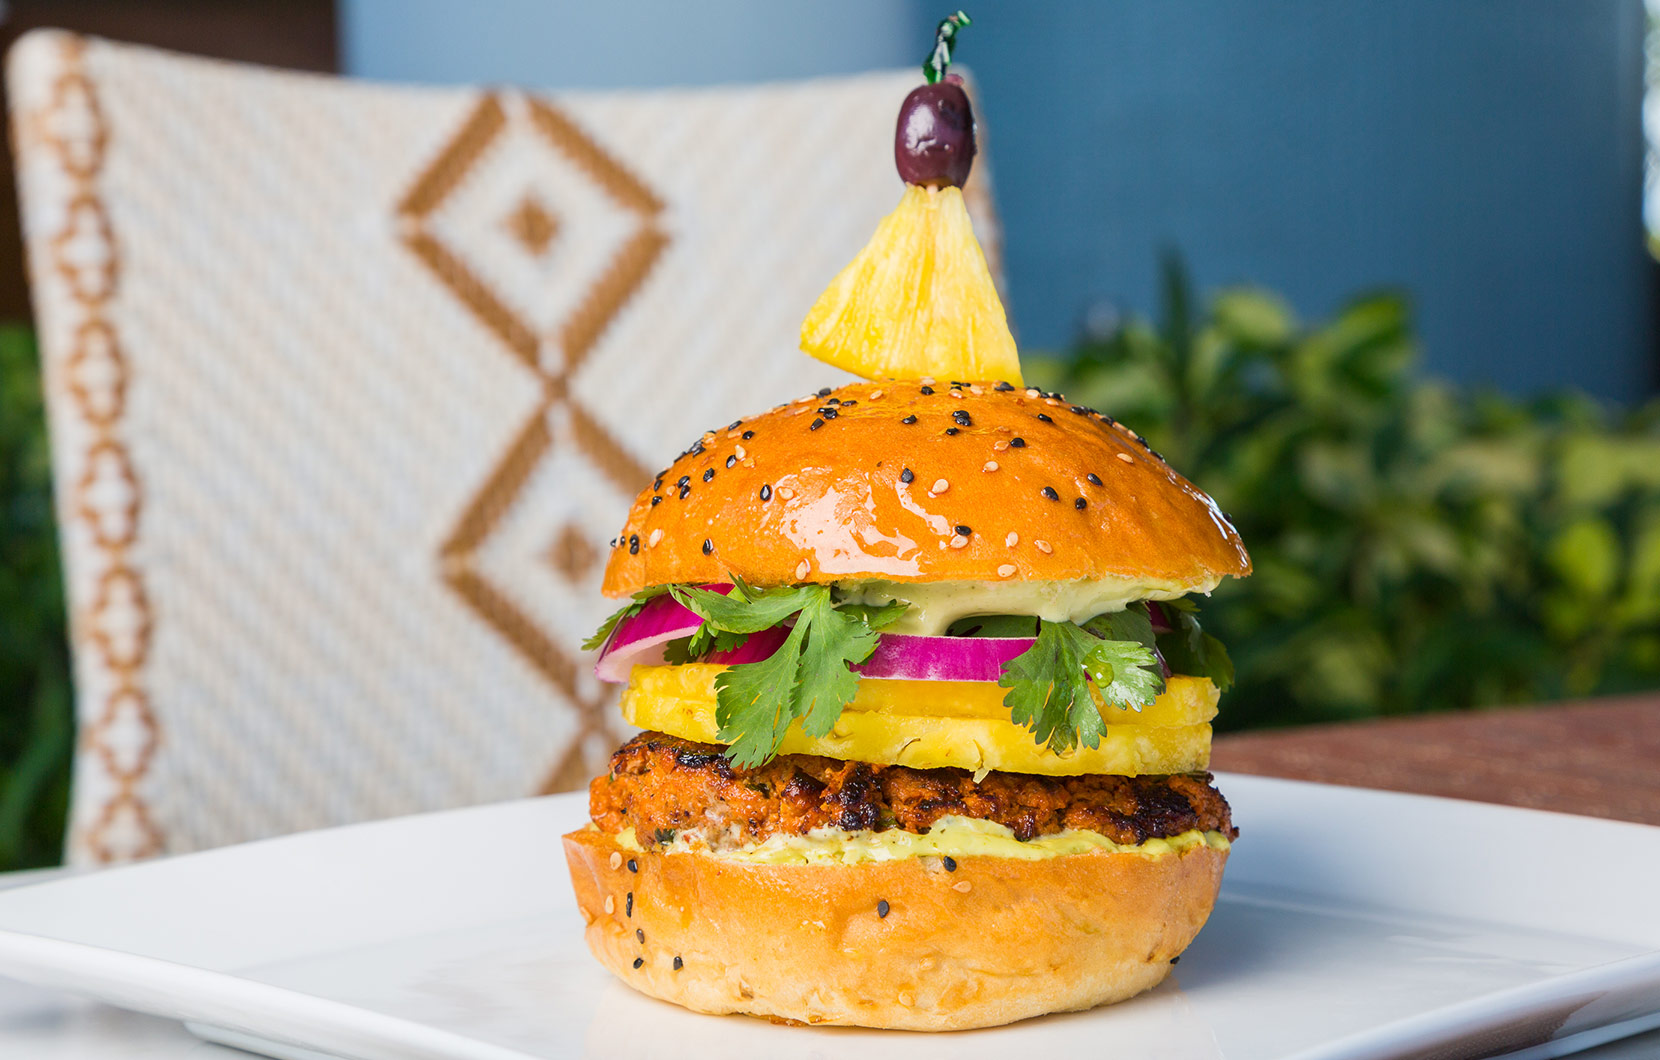 For Mexican flair on a bun, Chef Laura’s burger packs a punch.